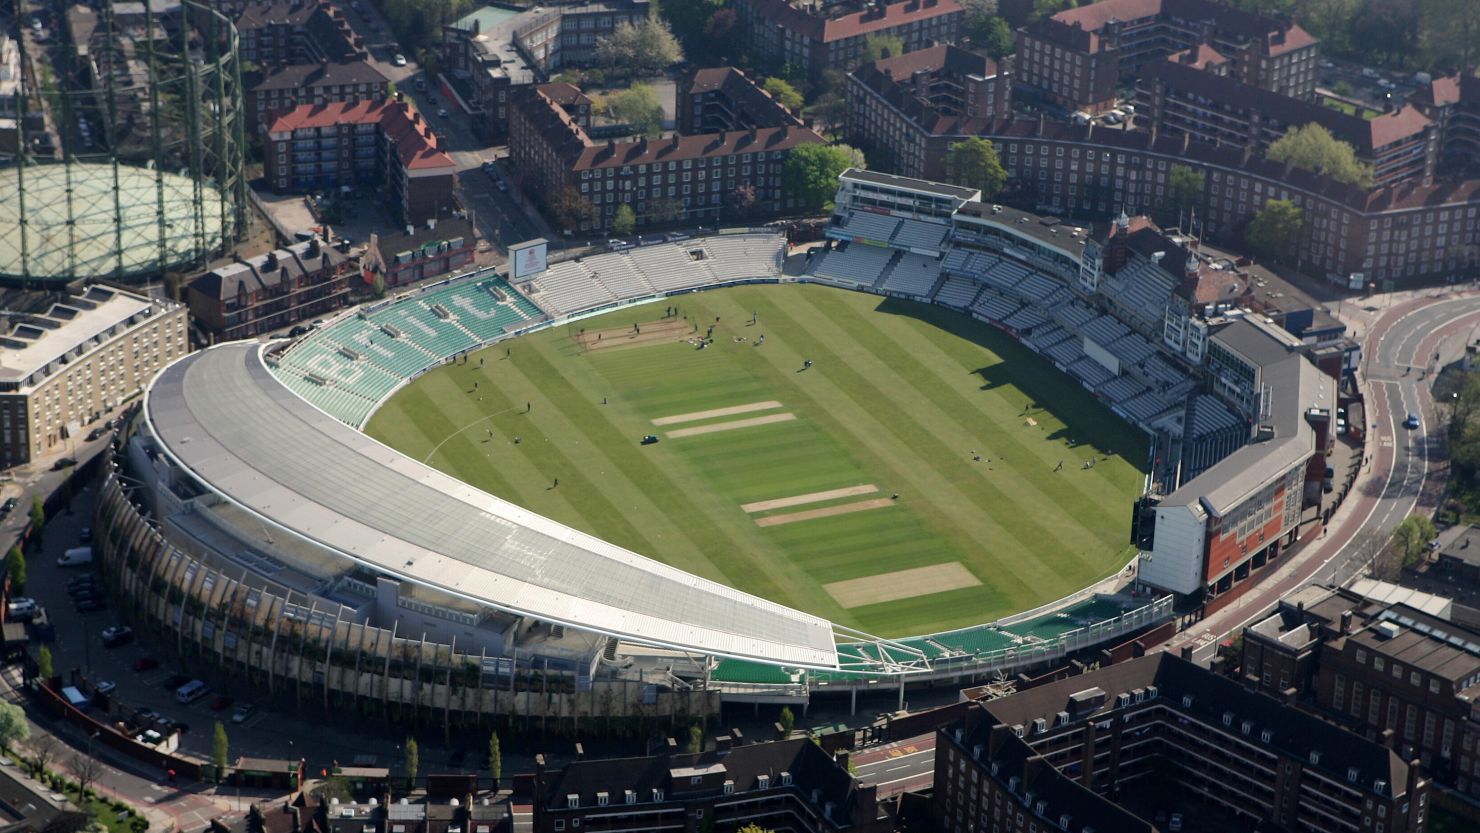 The Oval is one of the most famous cricket grounds in the UK.